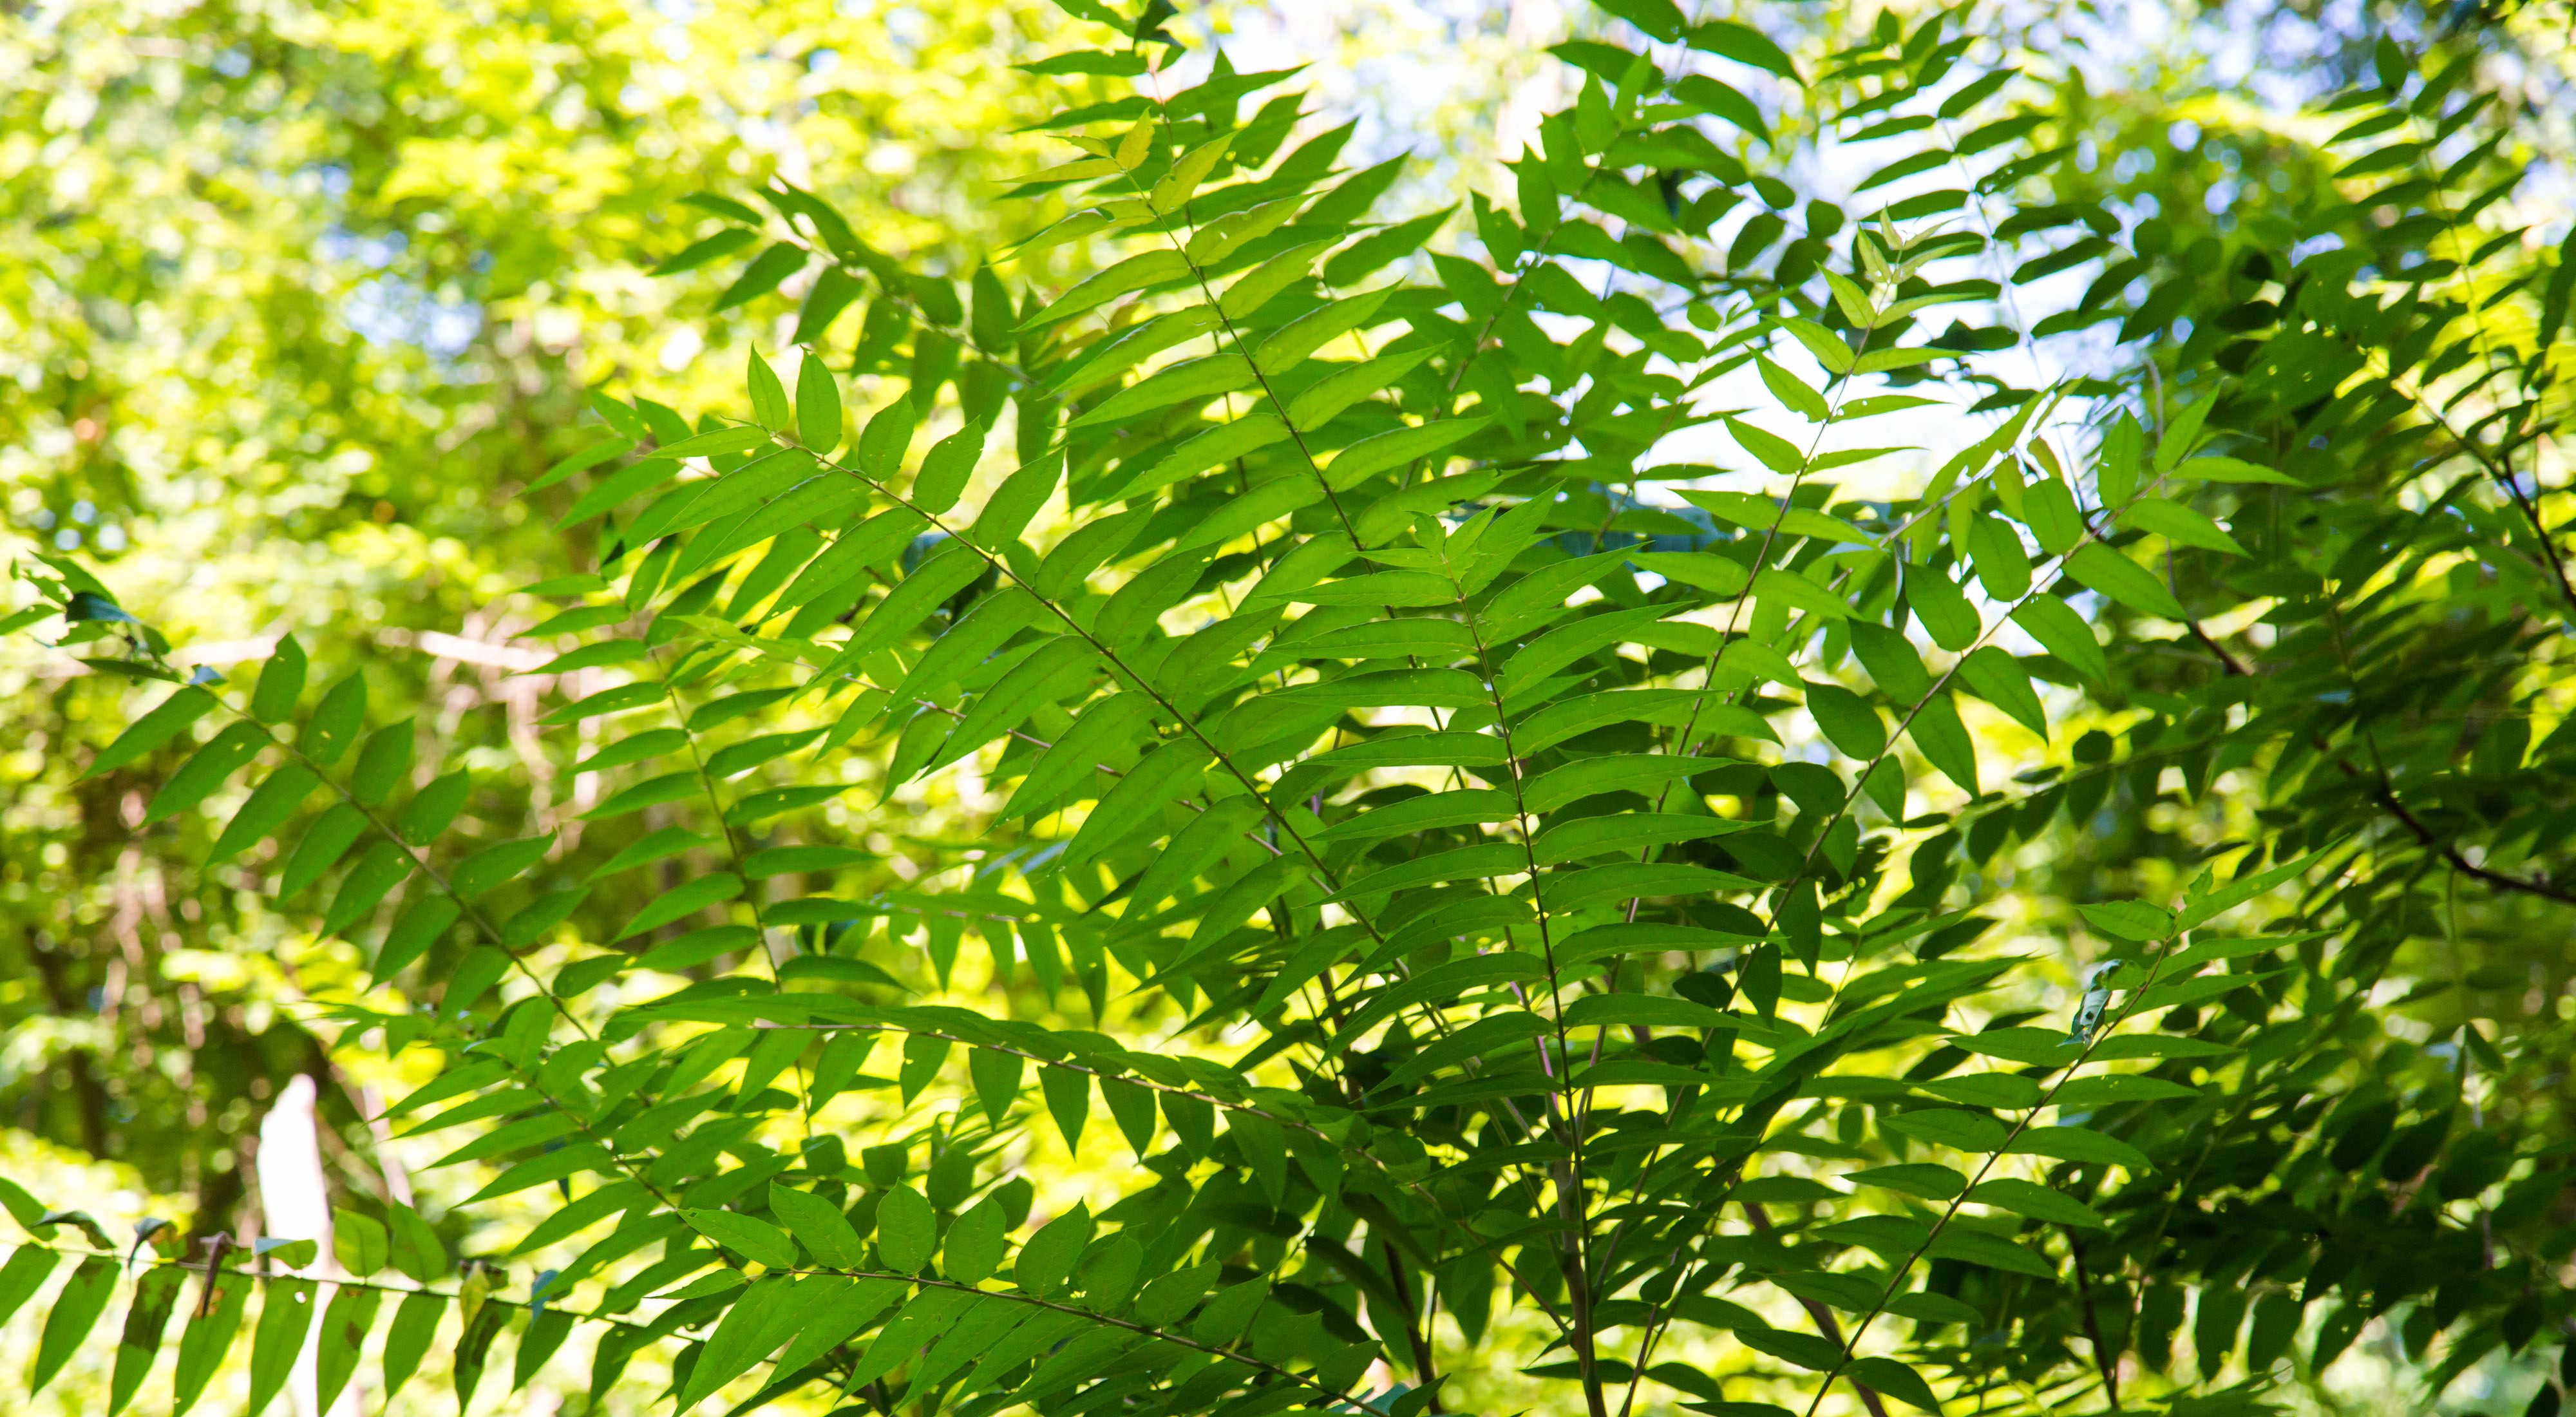 A close up of tree of heaven, an invasive species, showing its pinnately compound leaves.